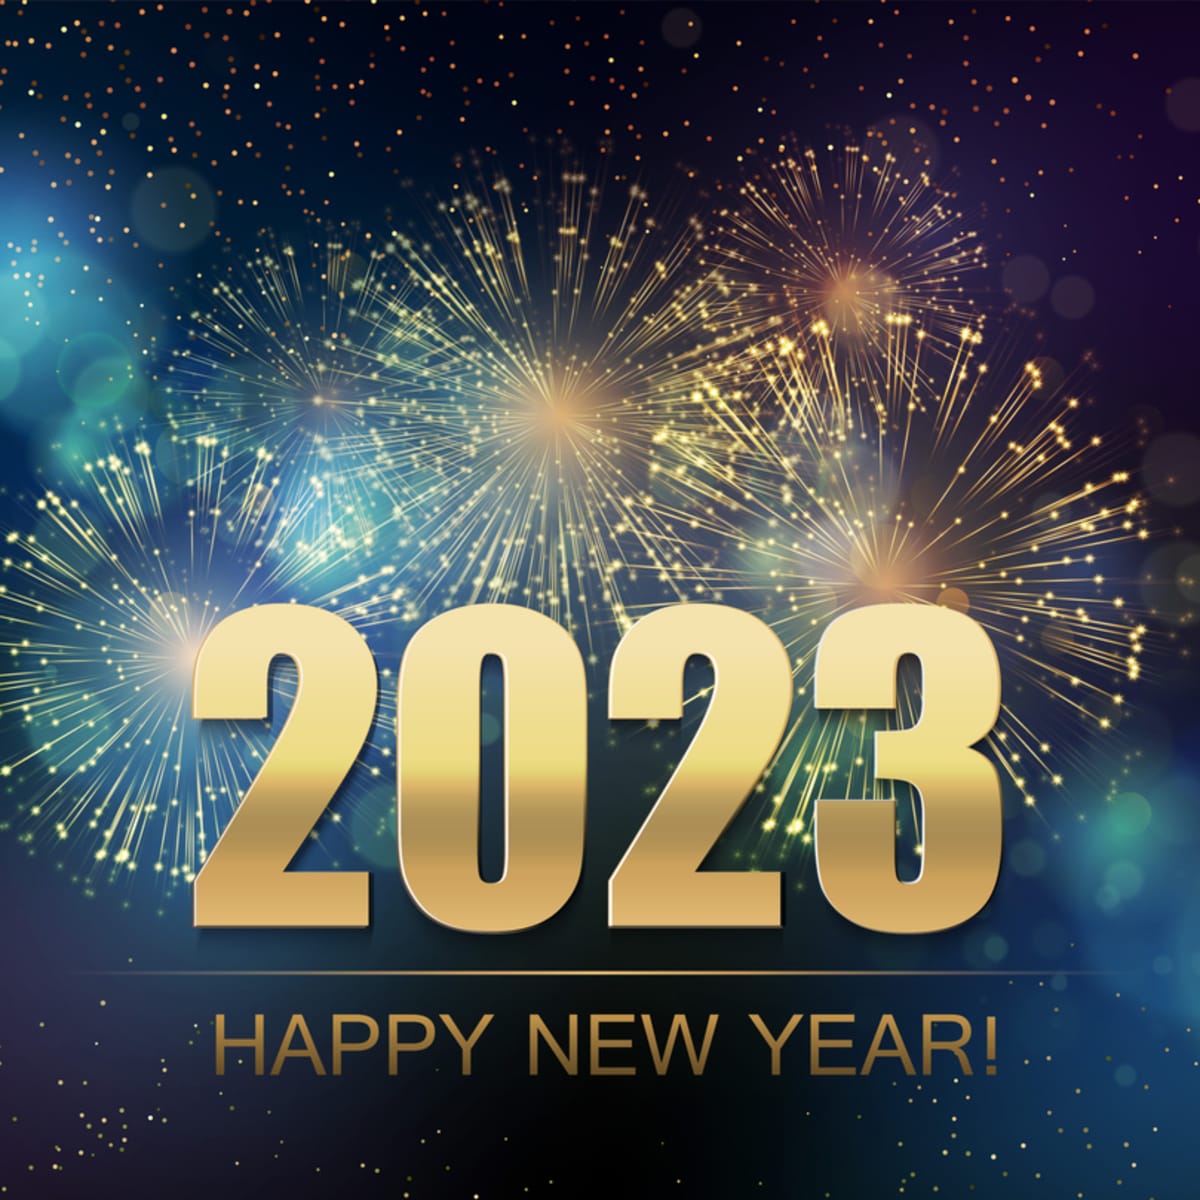 Happy New Year!!
In observance of the holiday, our hours have temporarily changed. 

Saturday 12/31: 10am-6pm
Sunday 1/1: 11am-7pm

See you in 2023!

#bnplazavenezia #bn #bnvolved #drphillips #bnbuzz #booklove #newyear #happynewyear2023  #newyearsresolution #newyearnewyou2023